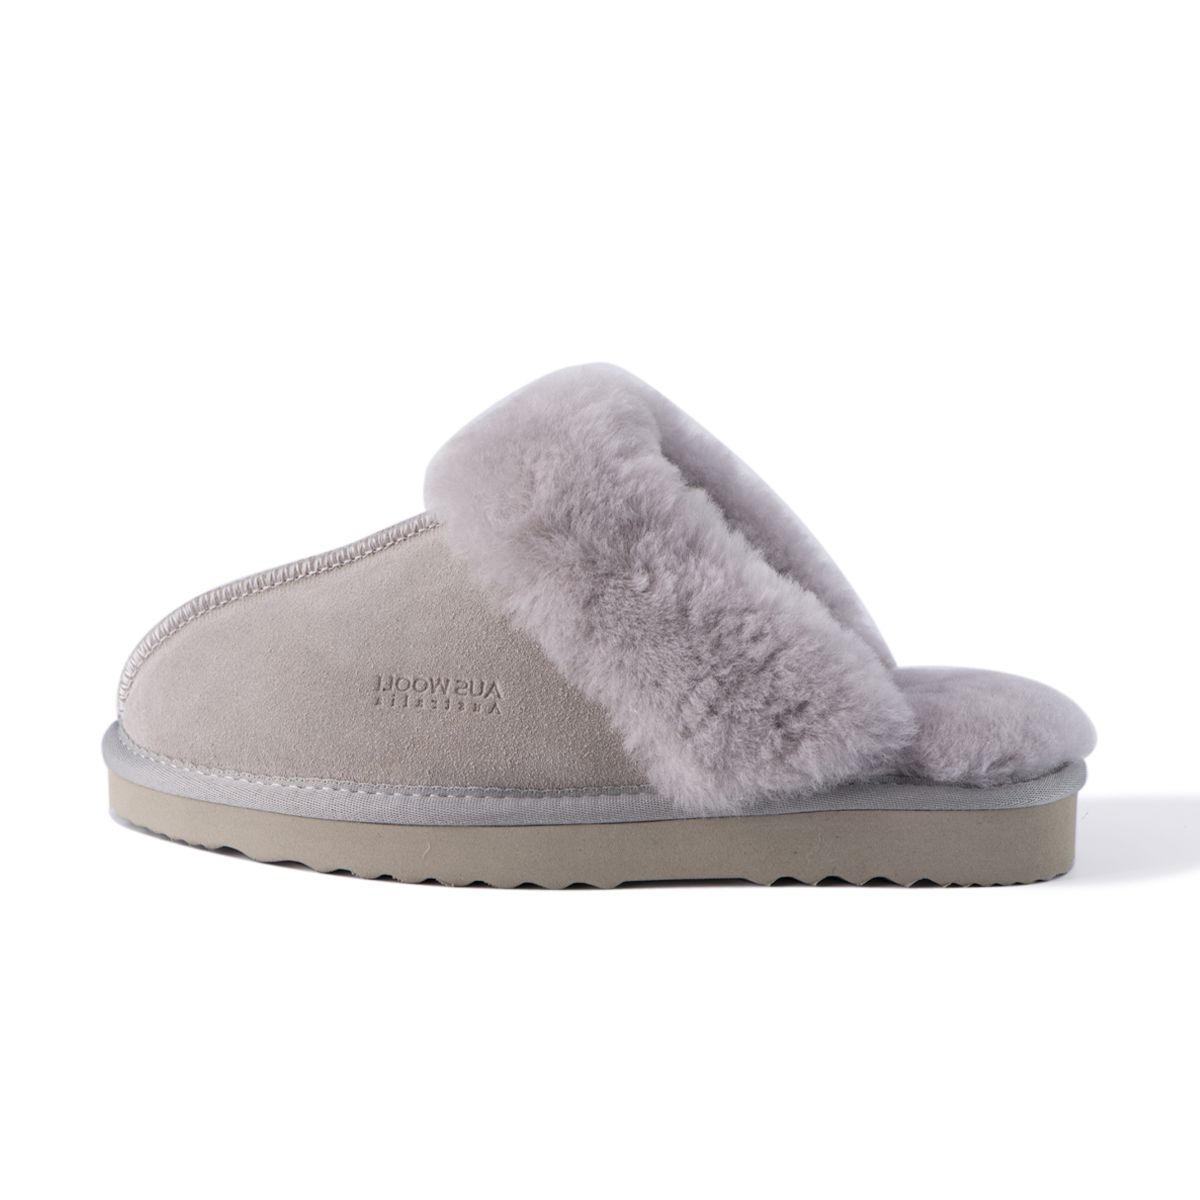 DETAILS





Cosy and snug, easy slip-on slipper

Soft premium genuine Australian Sheepskin wool lining
Full premium leather Suede upper with Australian sheepskin insole
Sustainably sourced and eco-friendly processed
Unisex sheepskin slipper - can be worn day and night
Soft EVA outsole - extra cushioning and lightweight
Firm wool pelt for superior warmth
100% brand new and high quality, comes in a branded box, suitable for gift